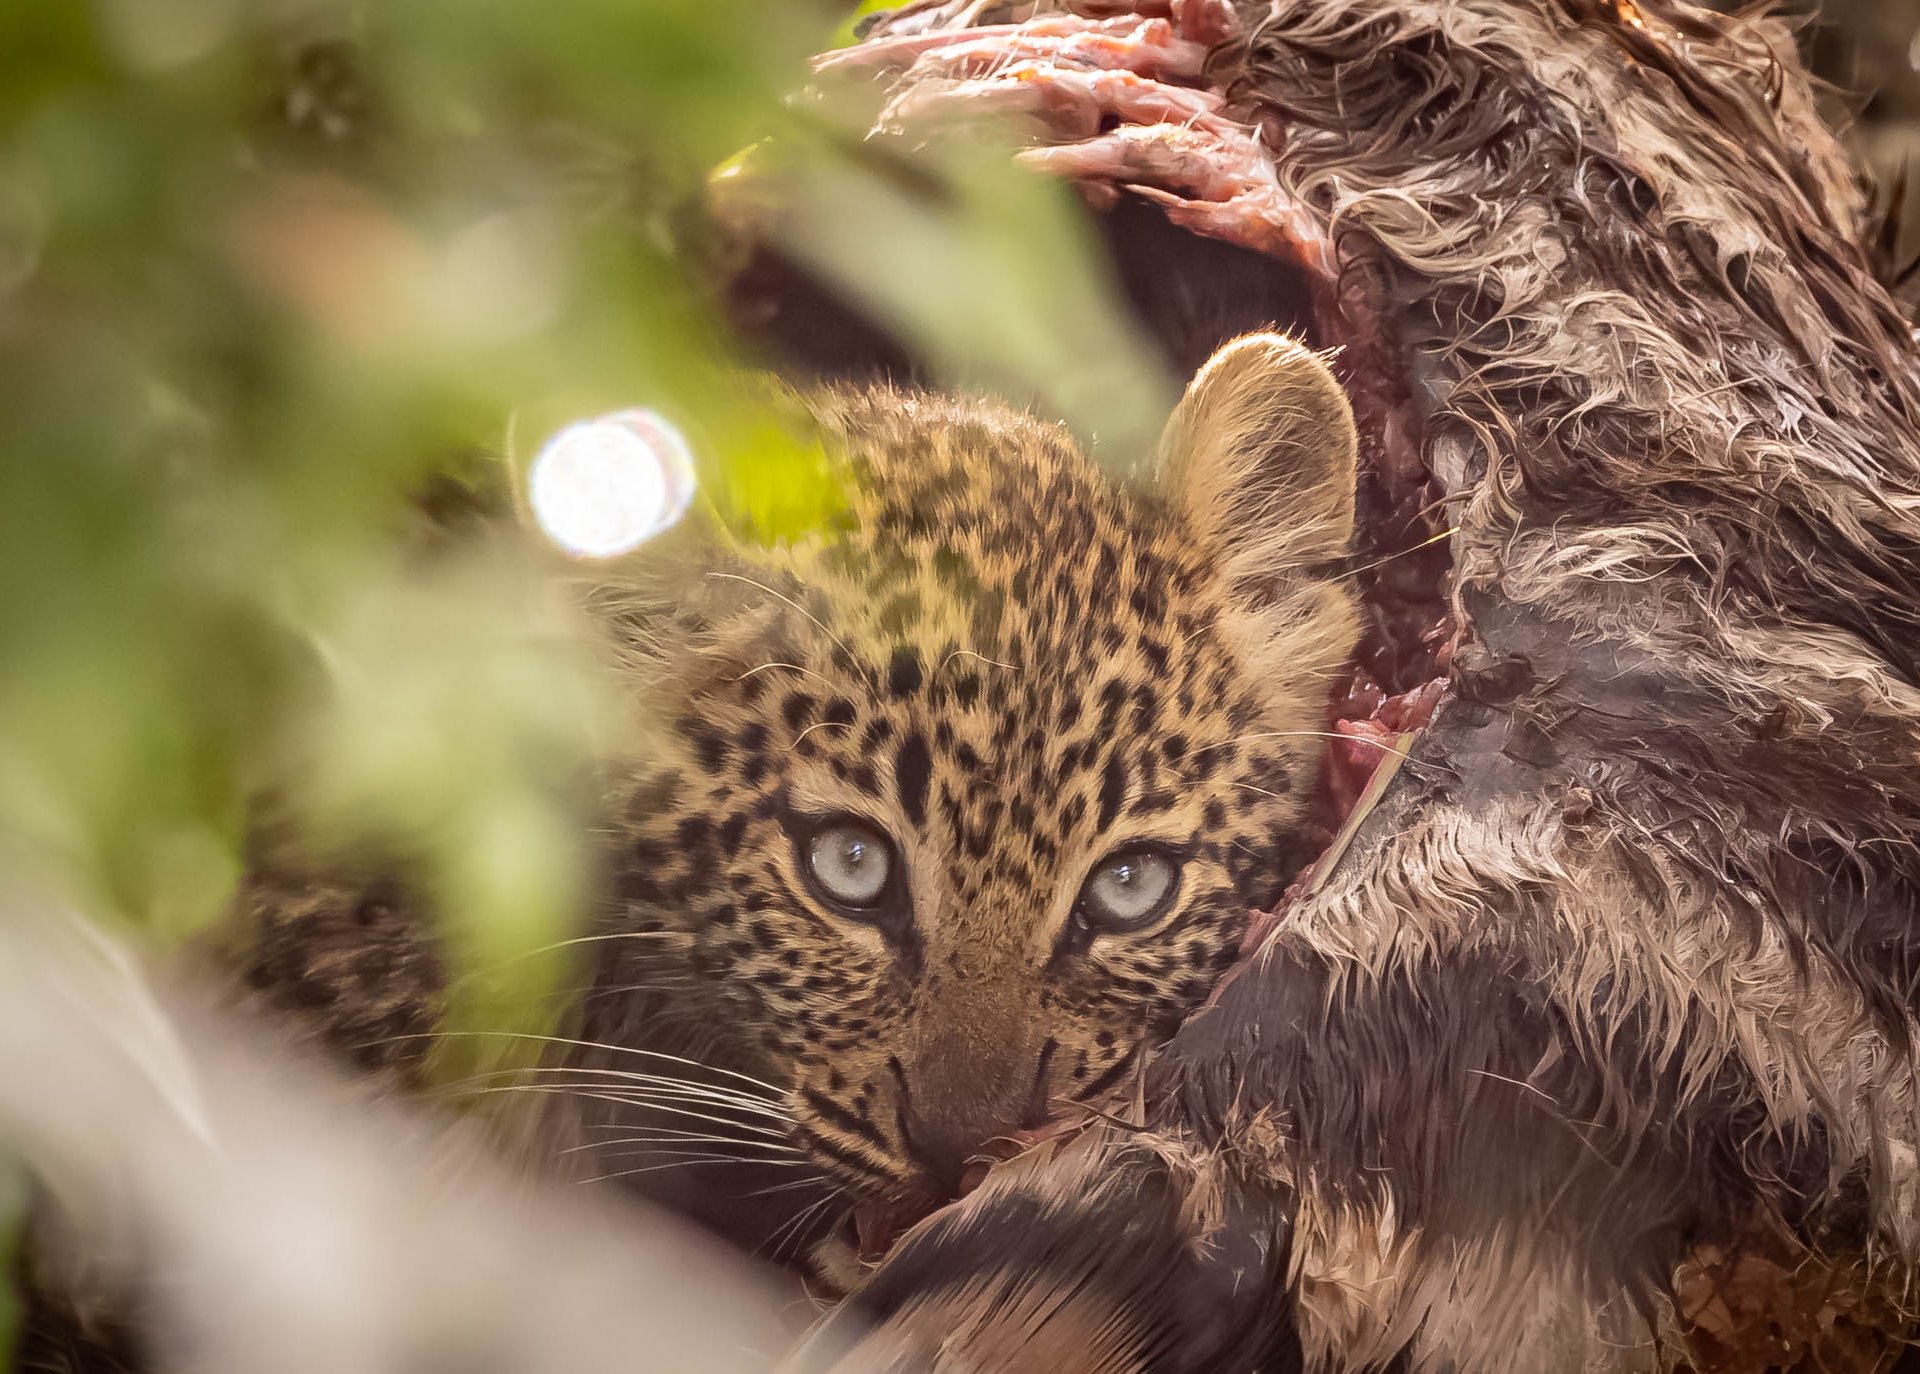 Above: A young leopard still sporting its baby blues